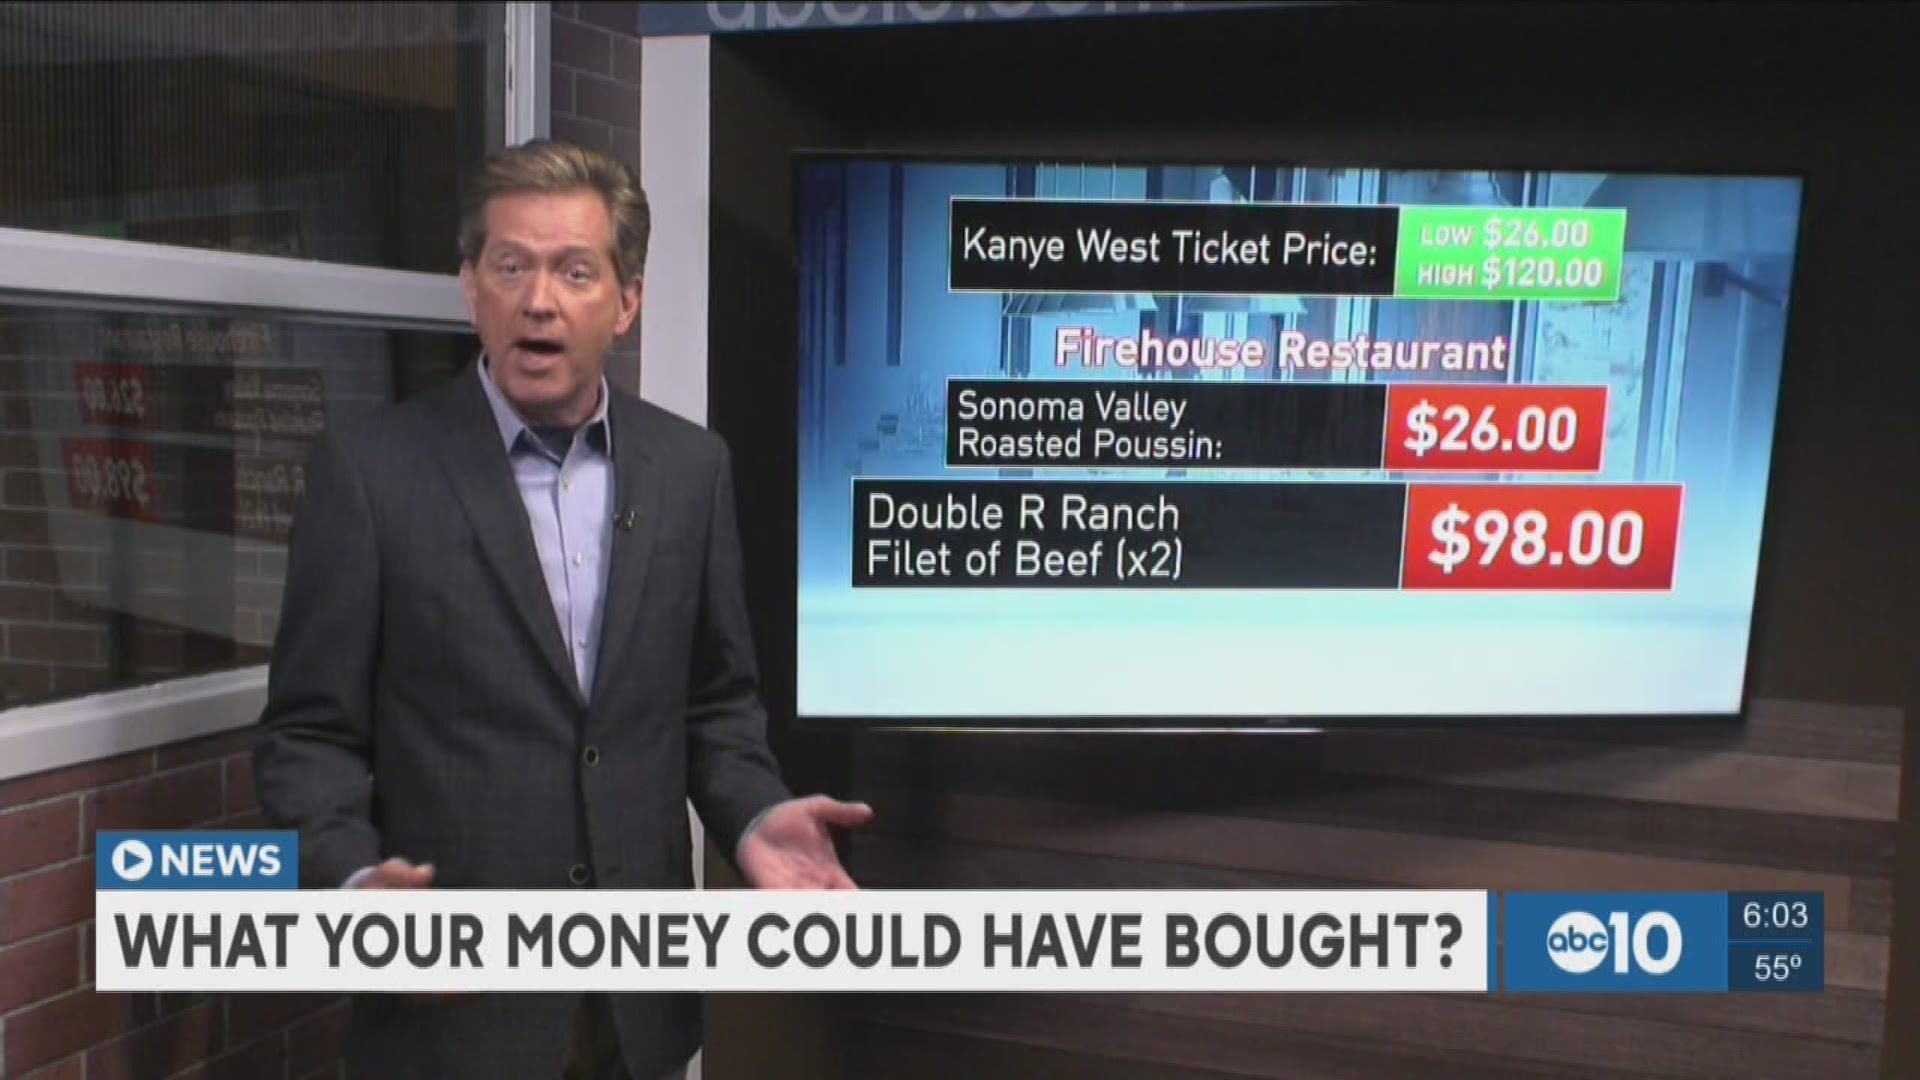 Hundreds of people are getting refunds on their tickets to Kanye West's Sacramento show, so what could you spend it on?